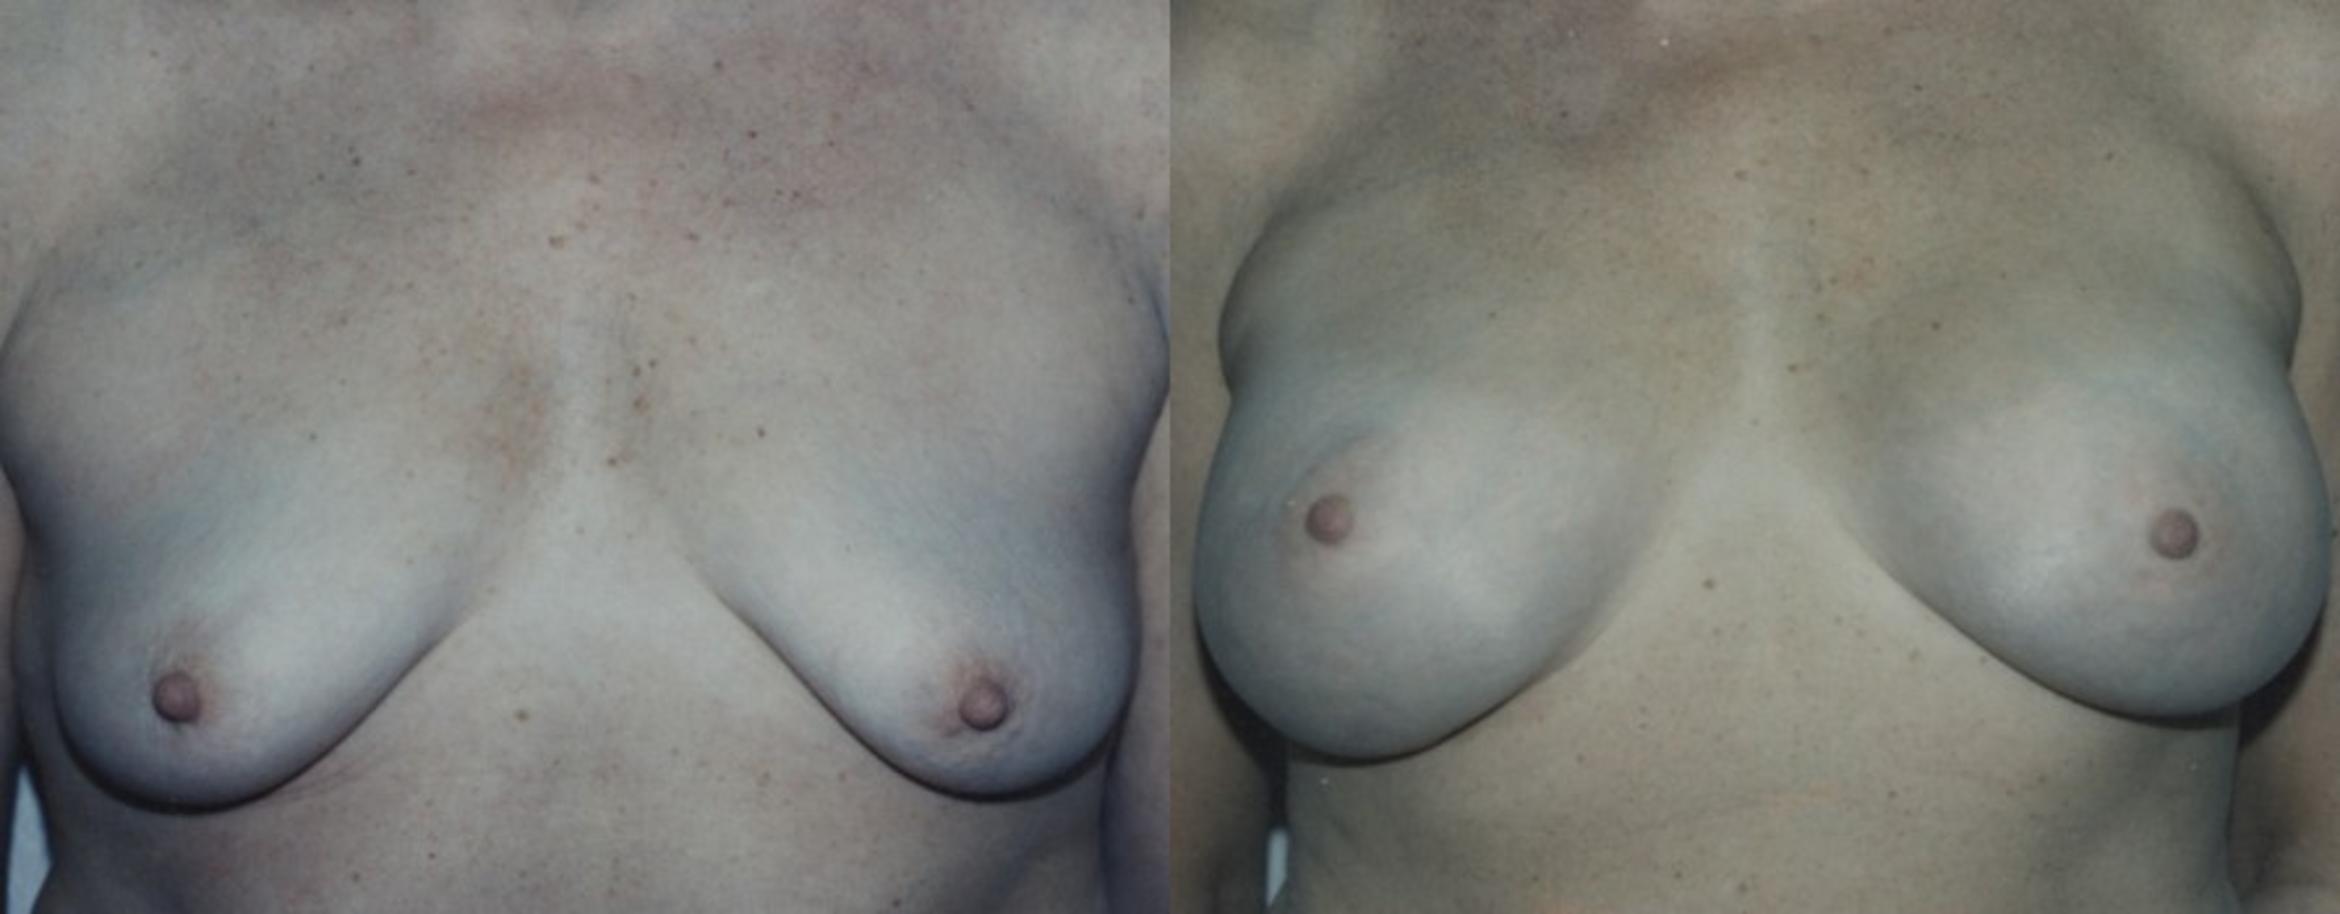 Breast Augmentation Before & After Photo | New Jersey & Pennsylvania,  | The Derm Group